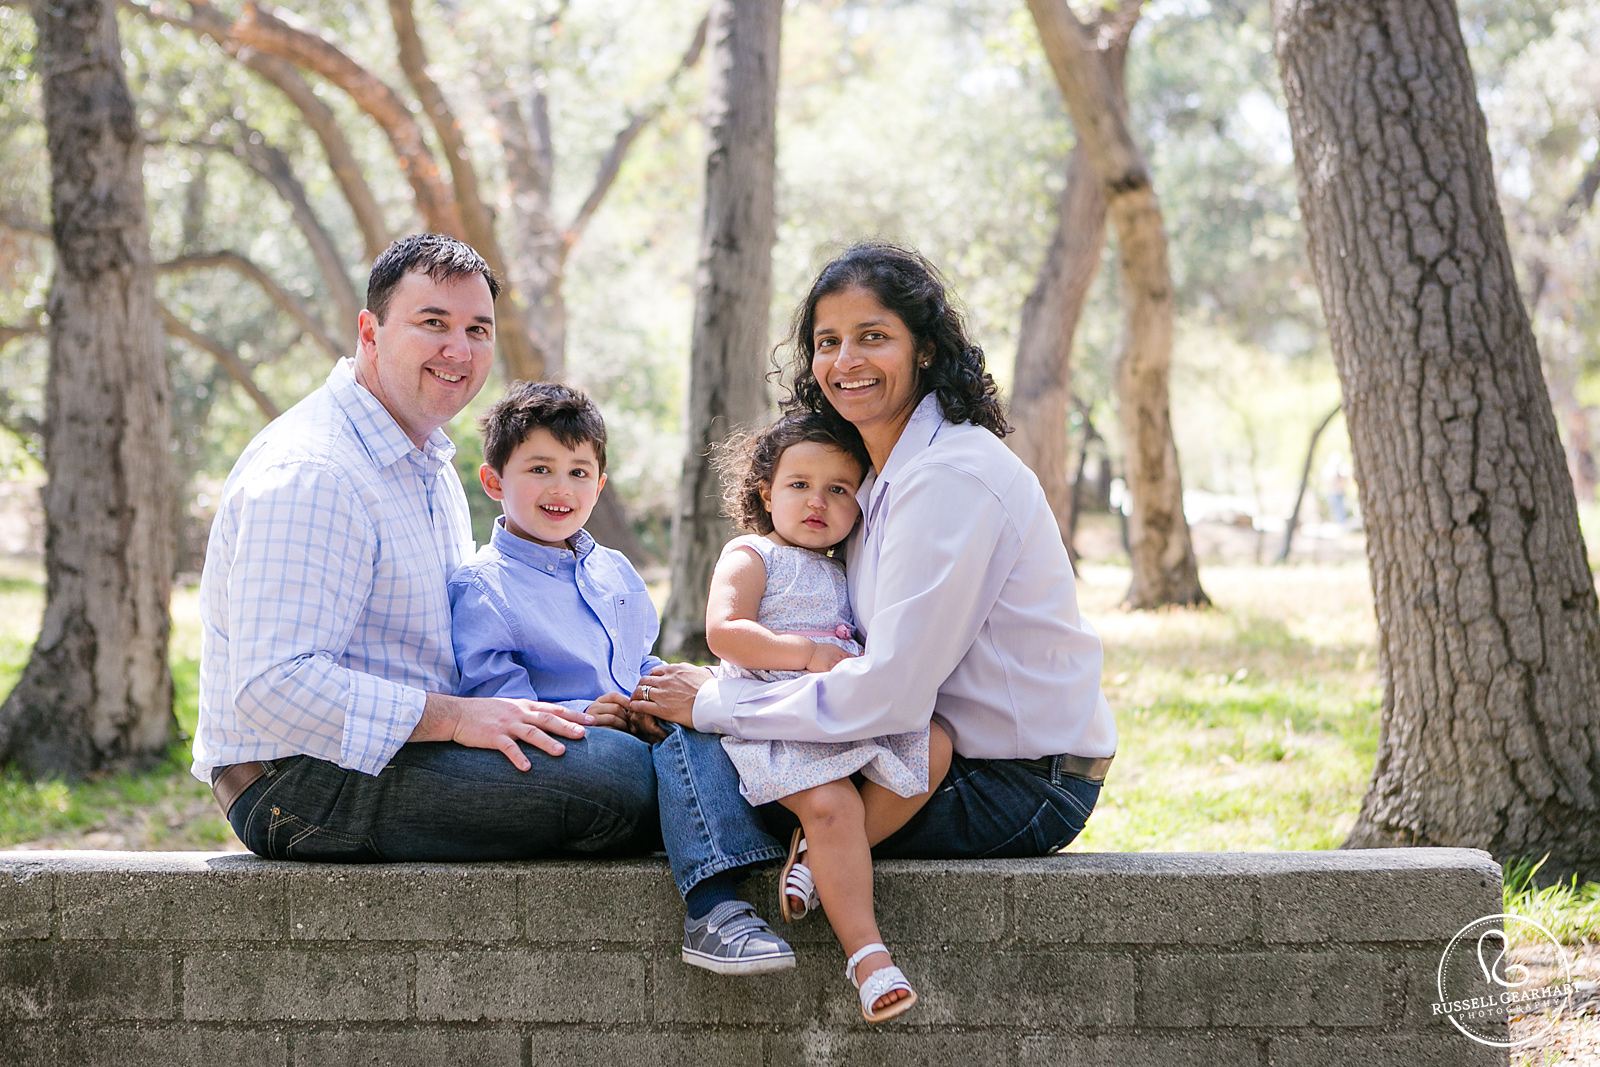 Descanso Gardens Family Portrait - Russell Gearhart Photography - www.gearhartphoto.com